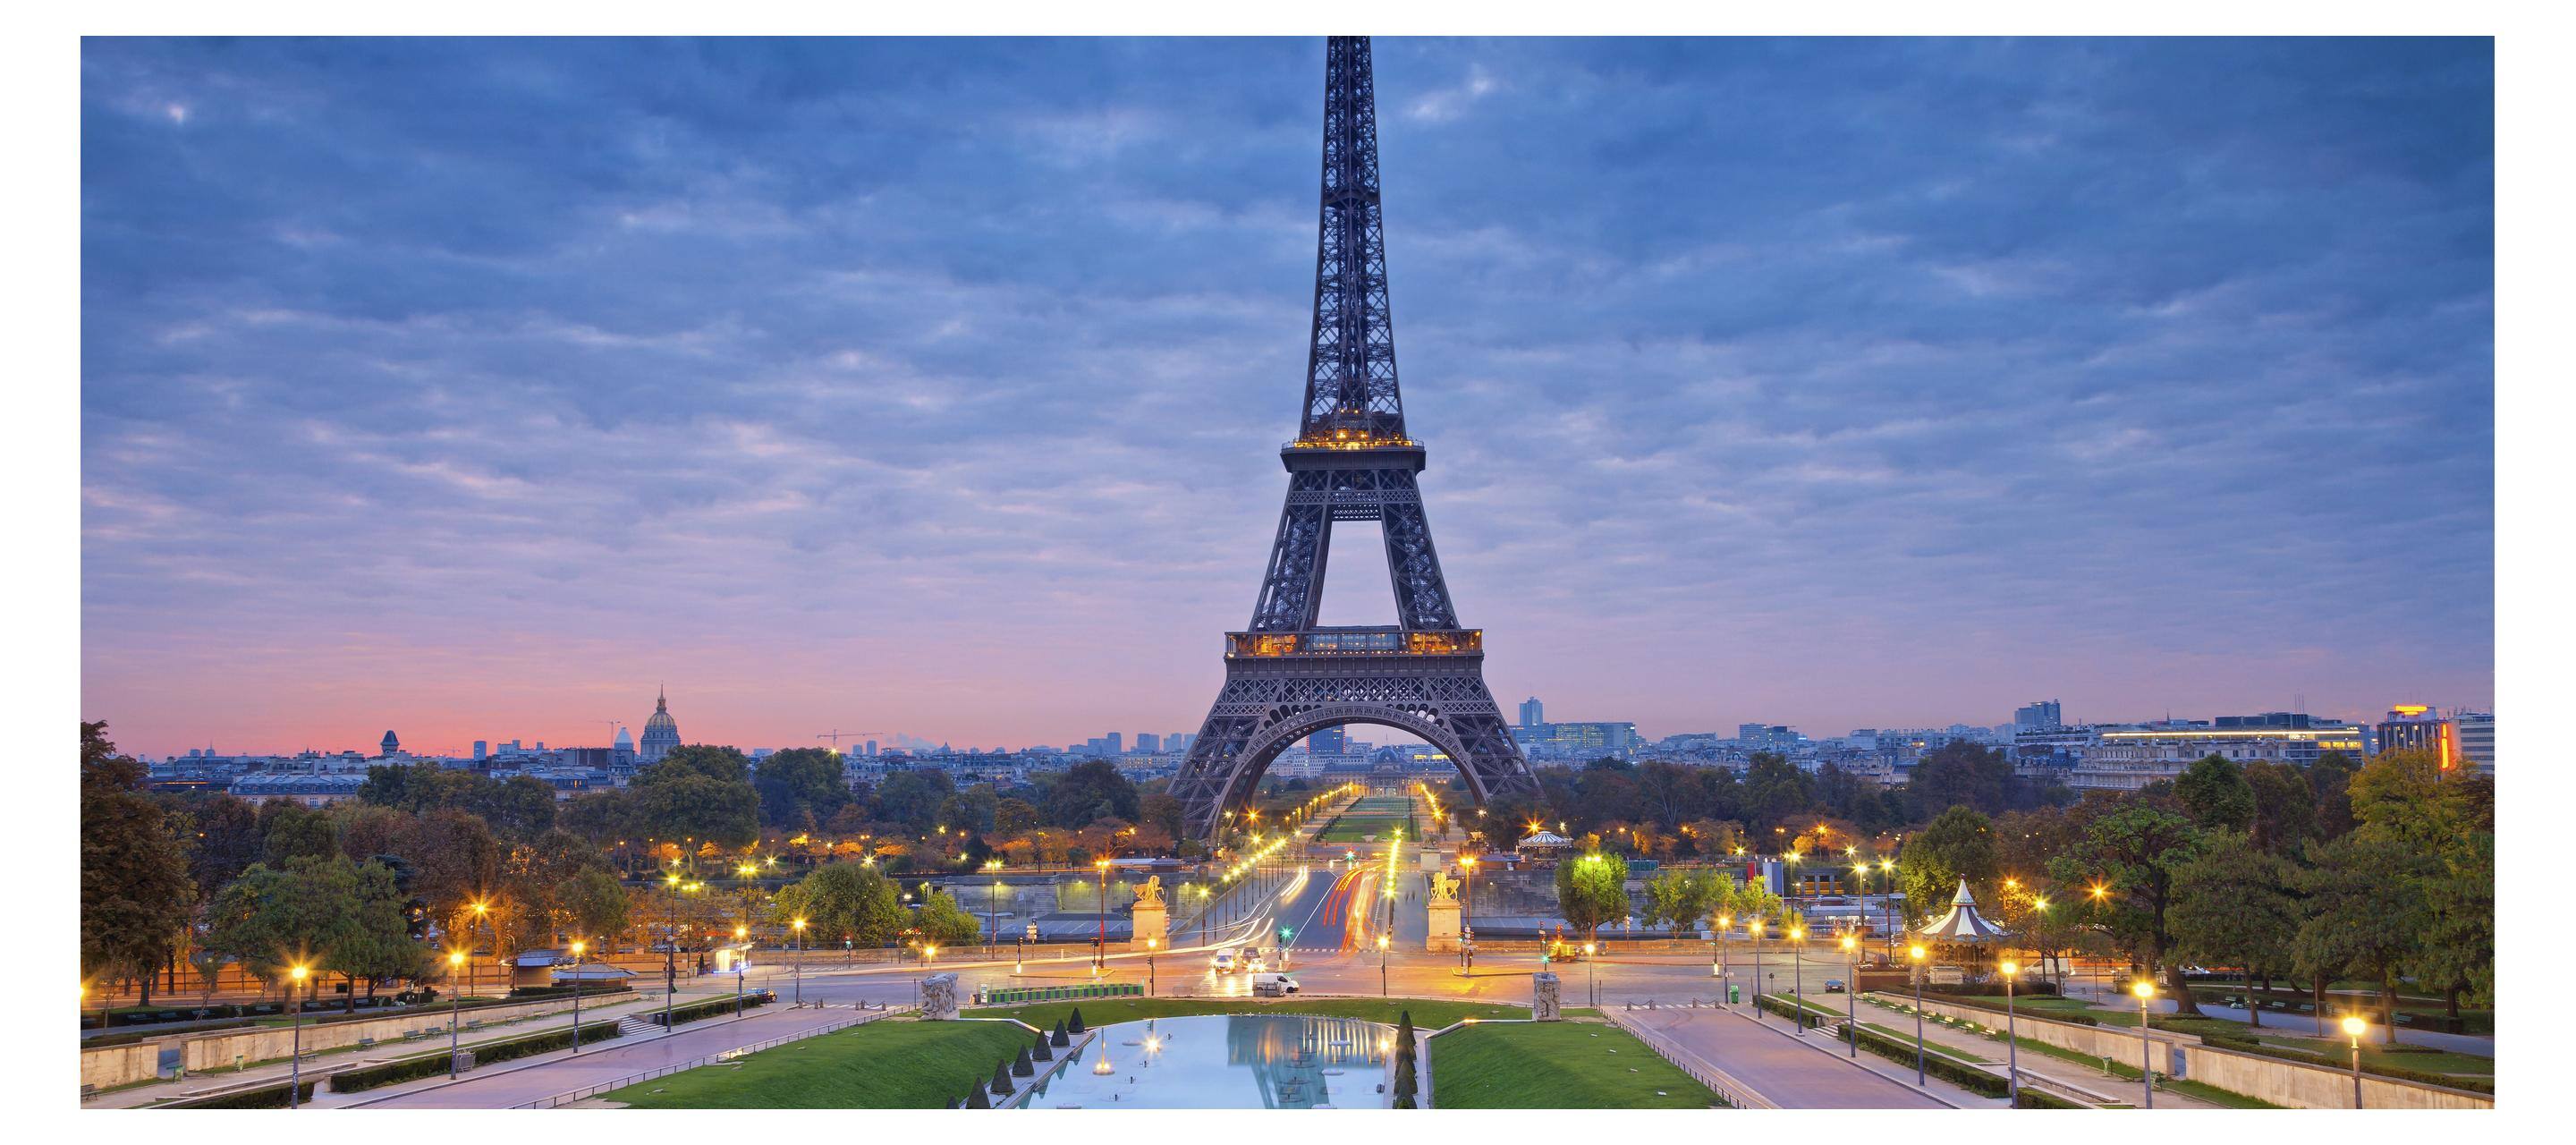 top places to visit in the world, most beautiful cities, top travel destinations, paris